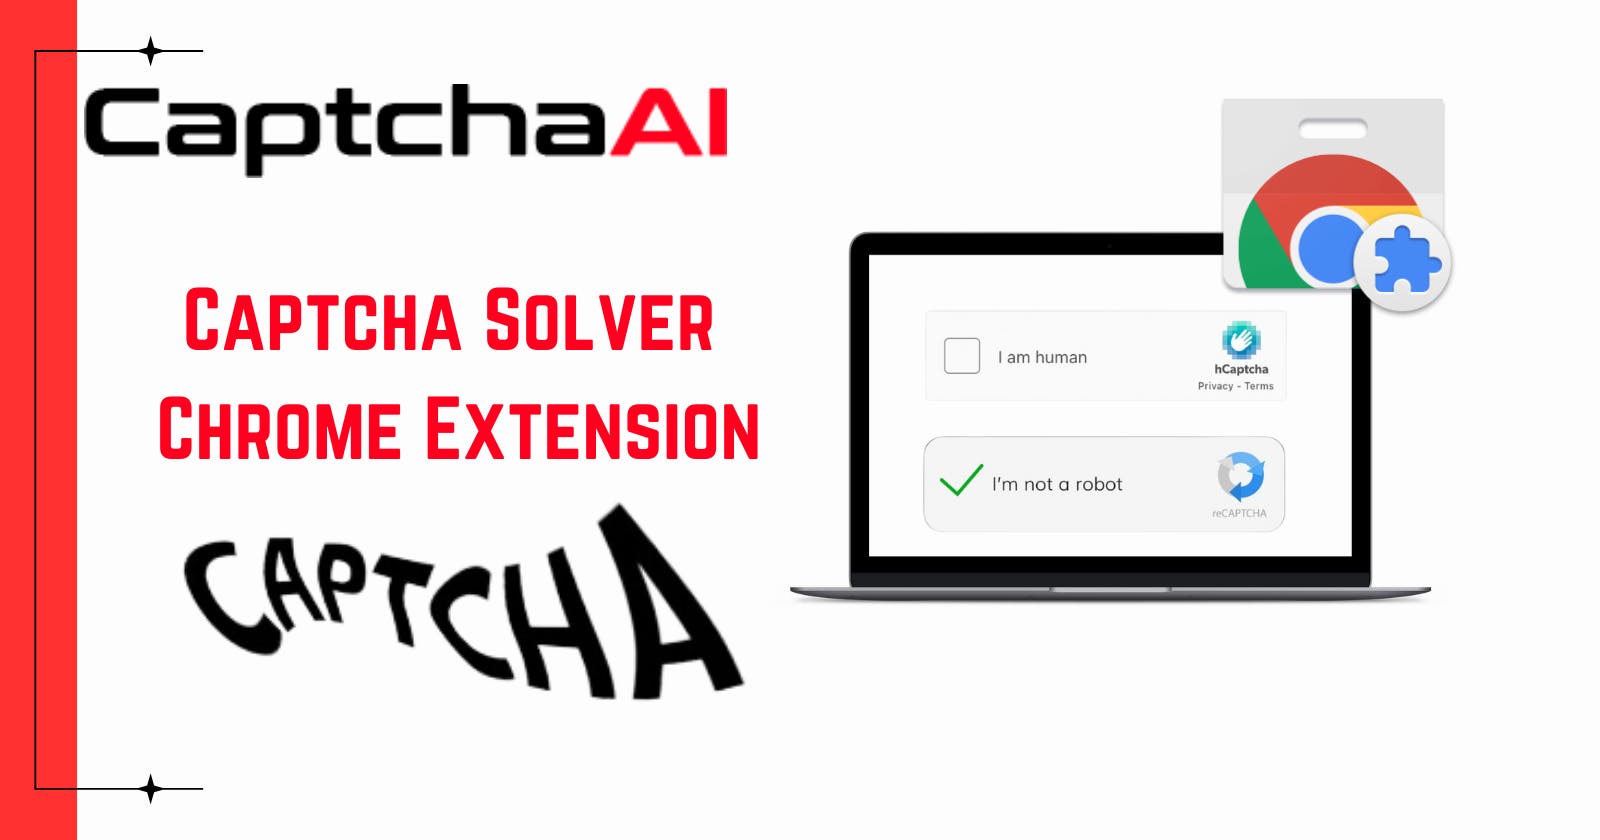 Overcoming Captcha Challenges: With Captcha Solver Chrome Extension